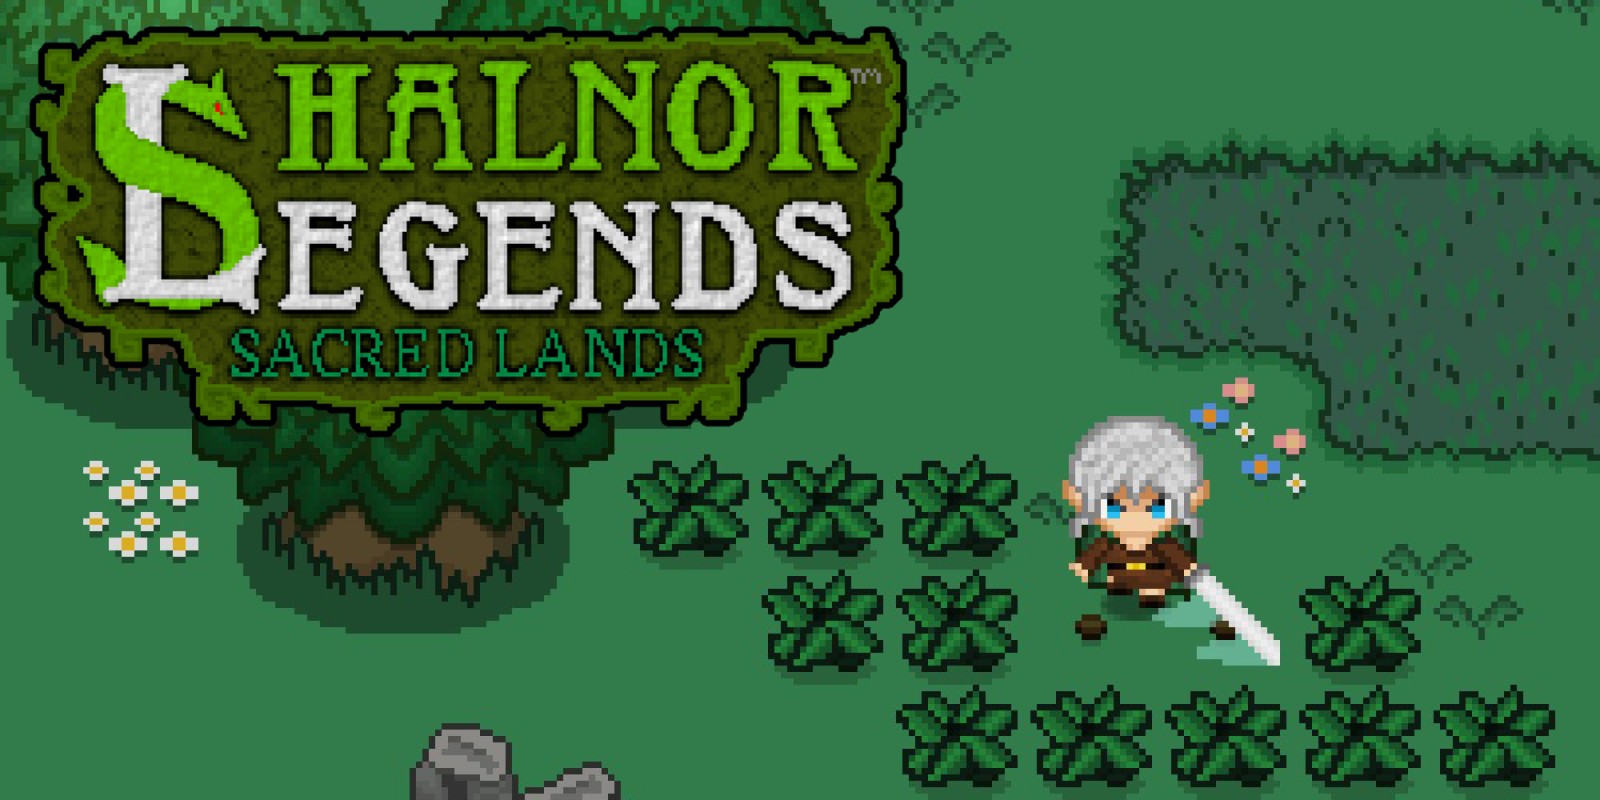 download the new Shalnor Legends 2: Trials of Thunder